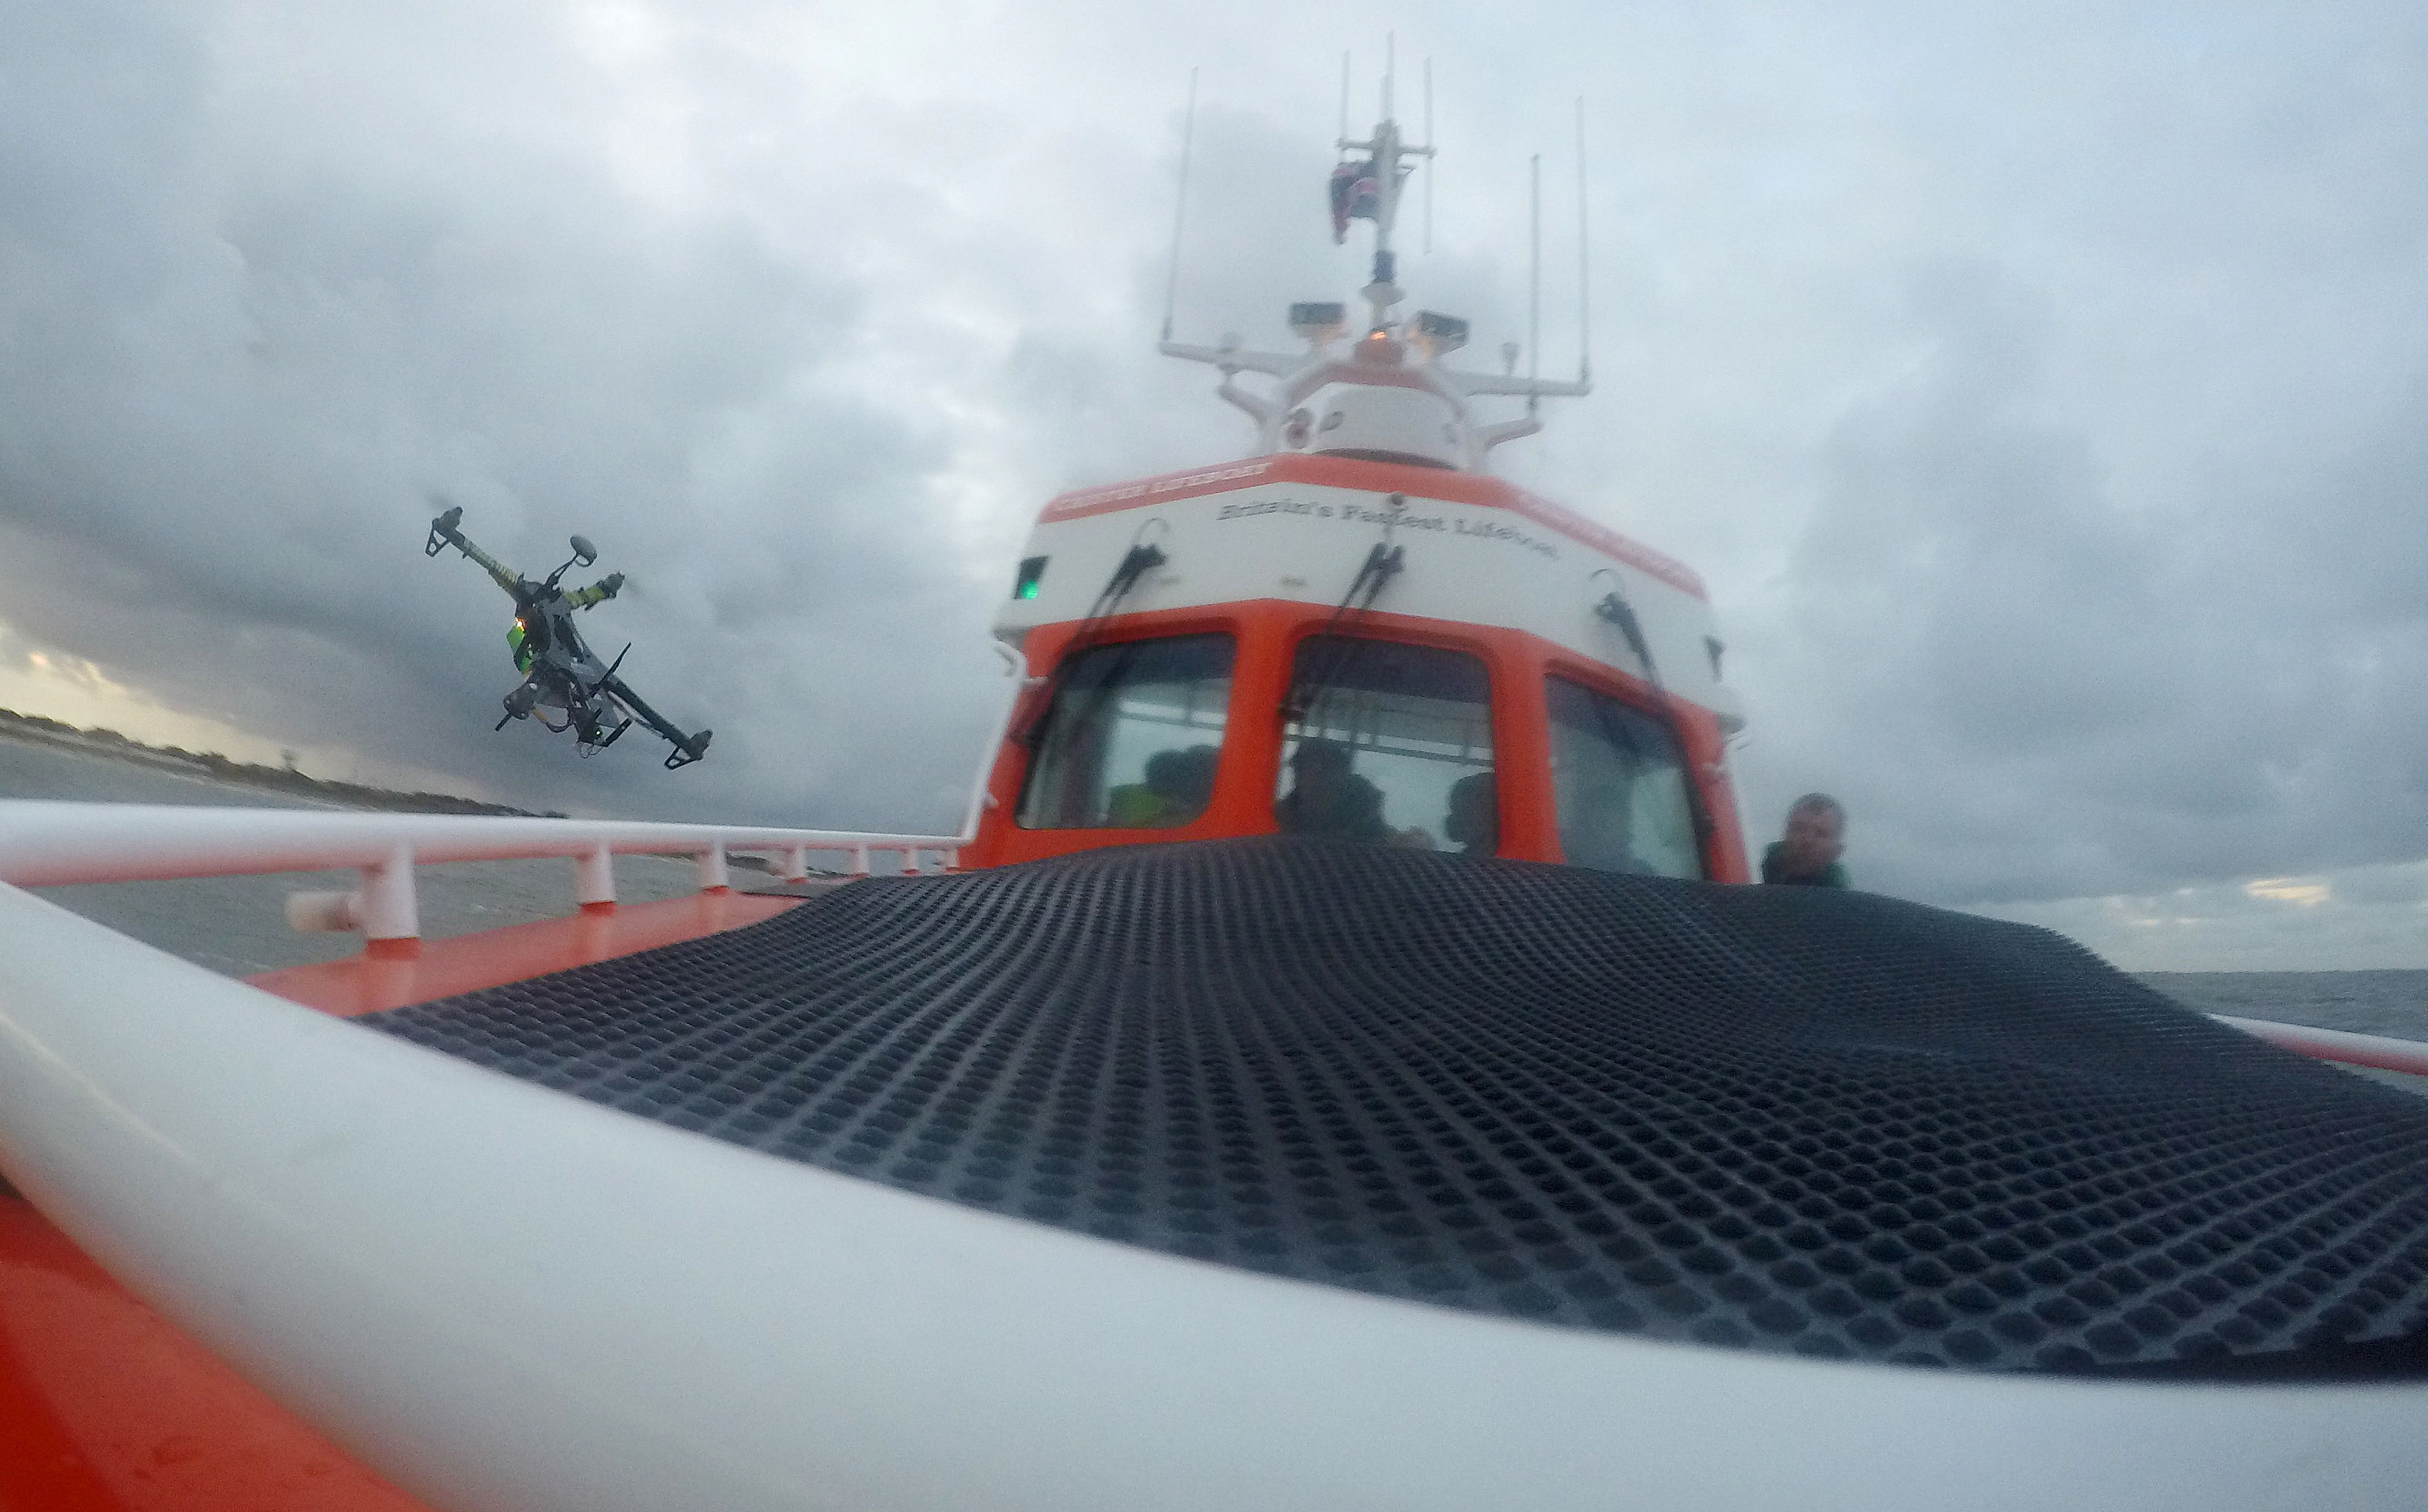 A drone takes off from a lifeboat at Caister in Norfolk